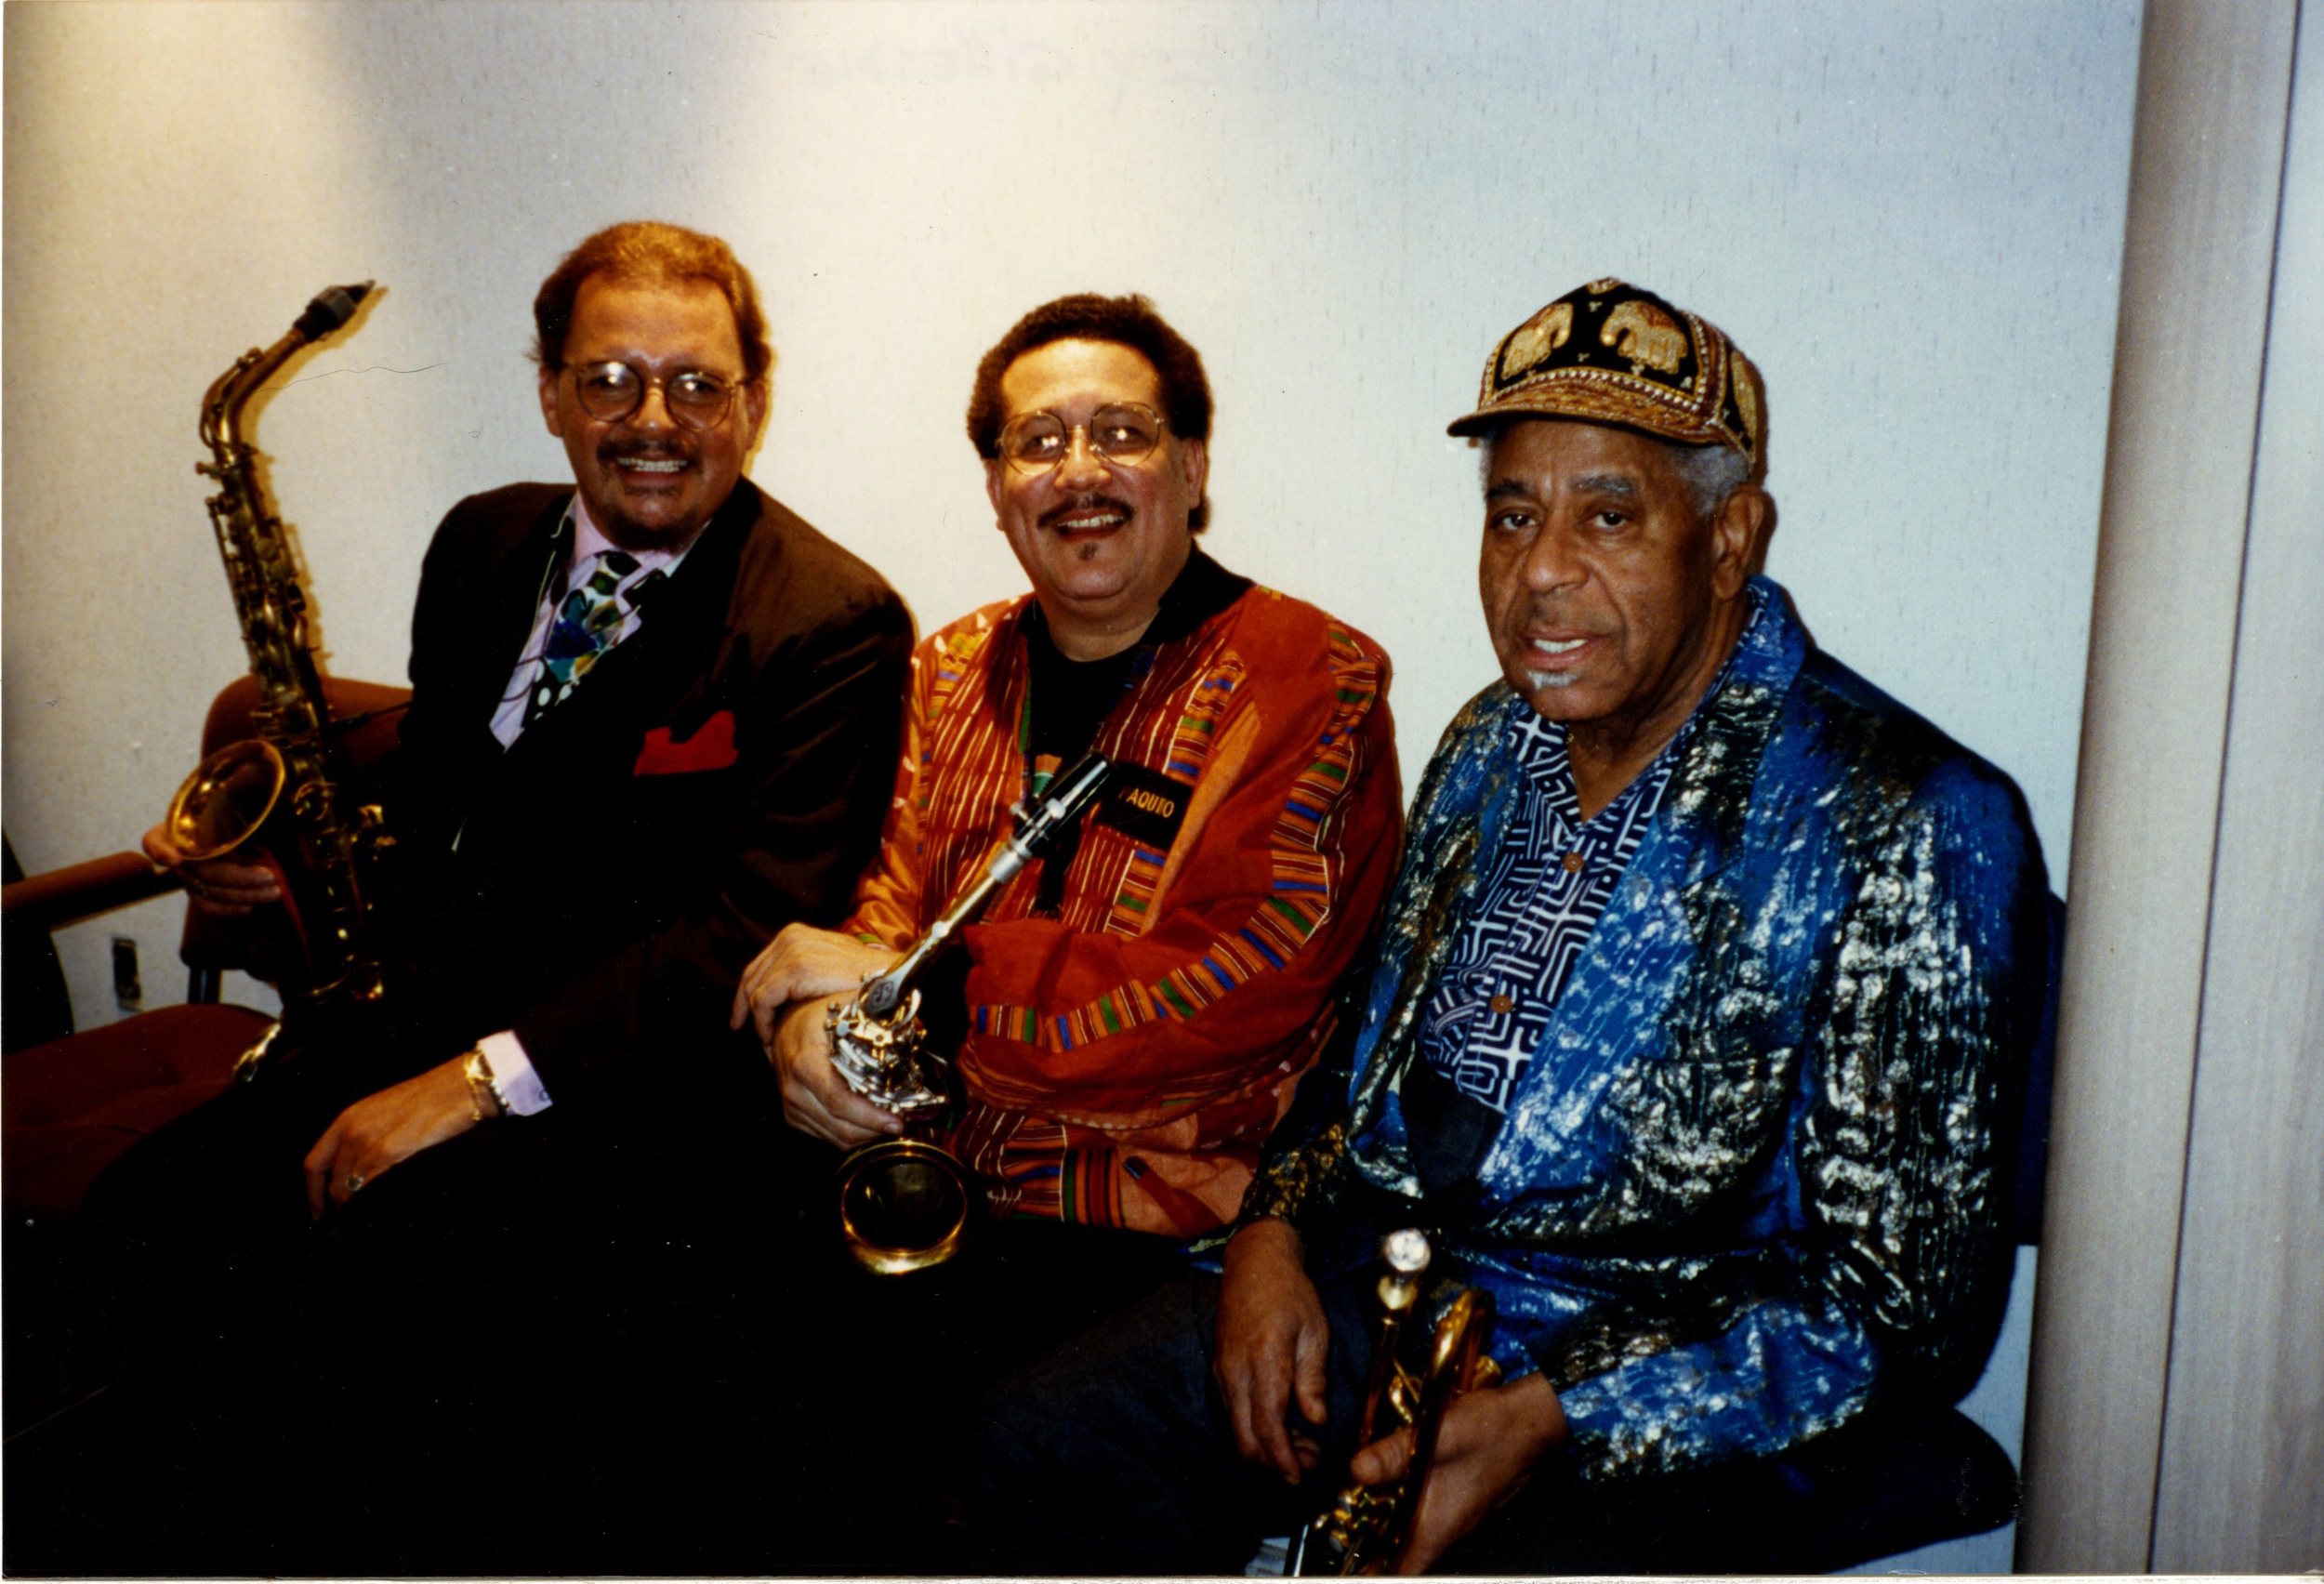 Paquito D'Rivera with Dizzy Gillespie